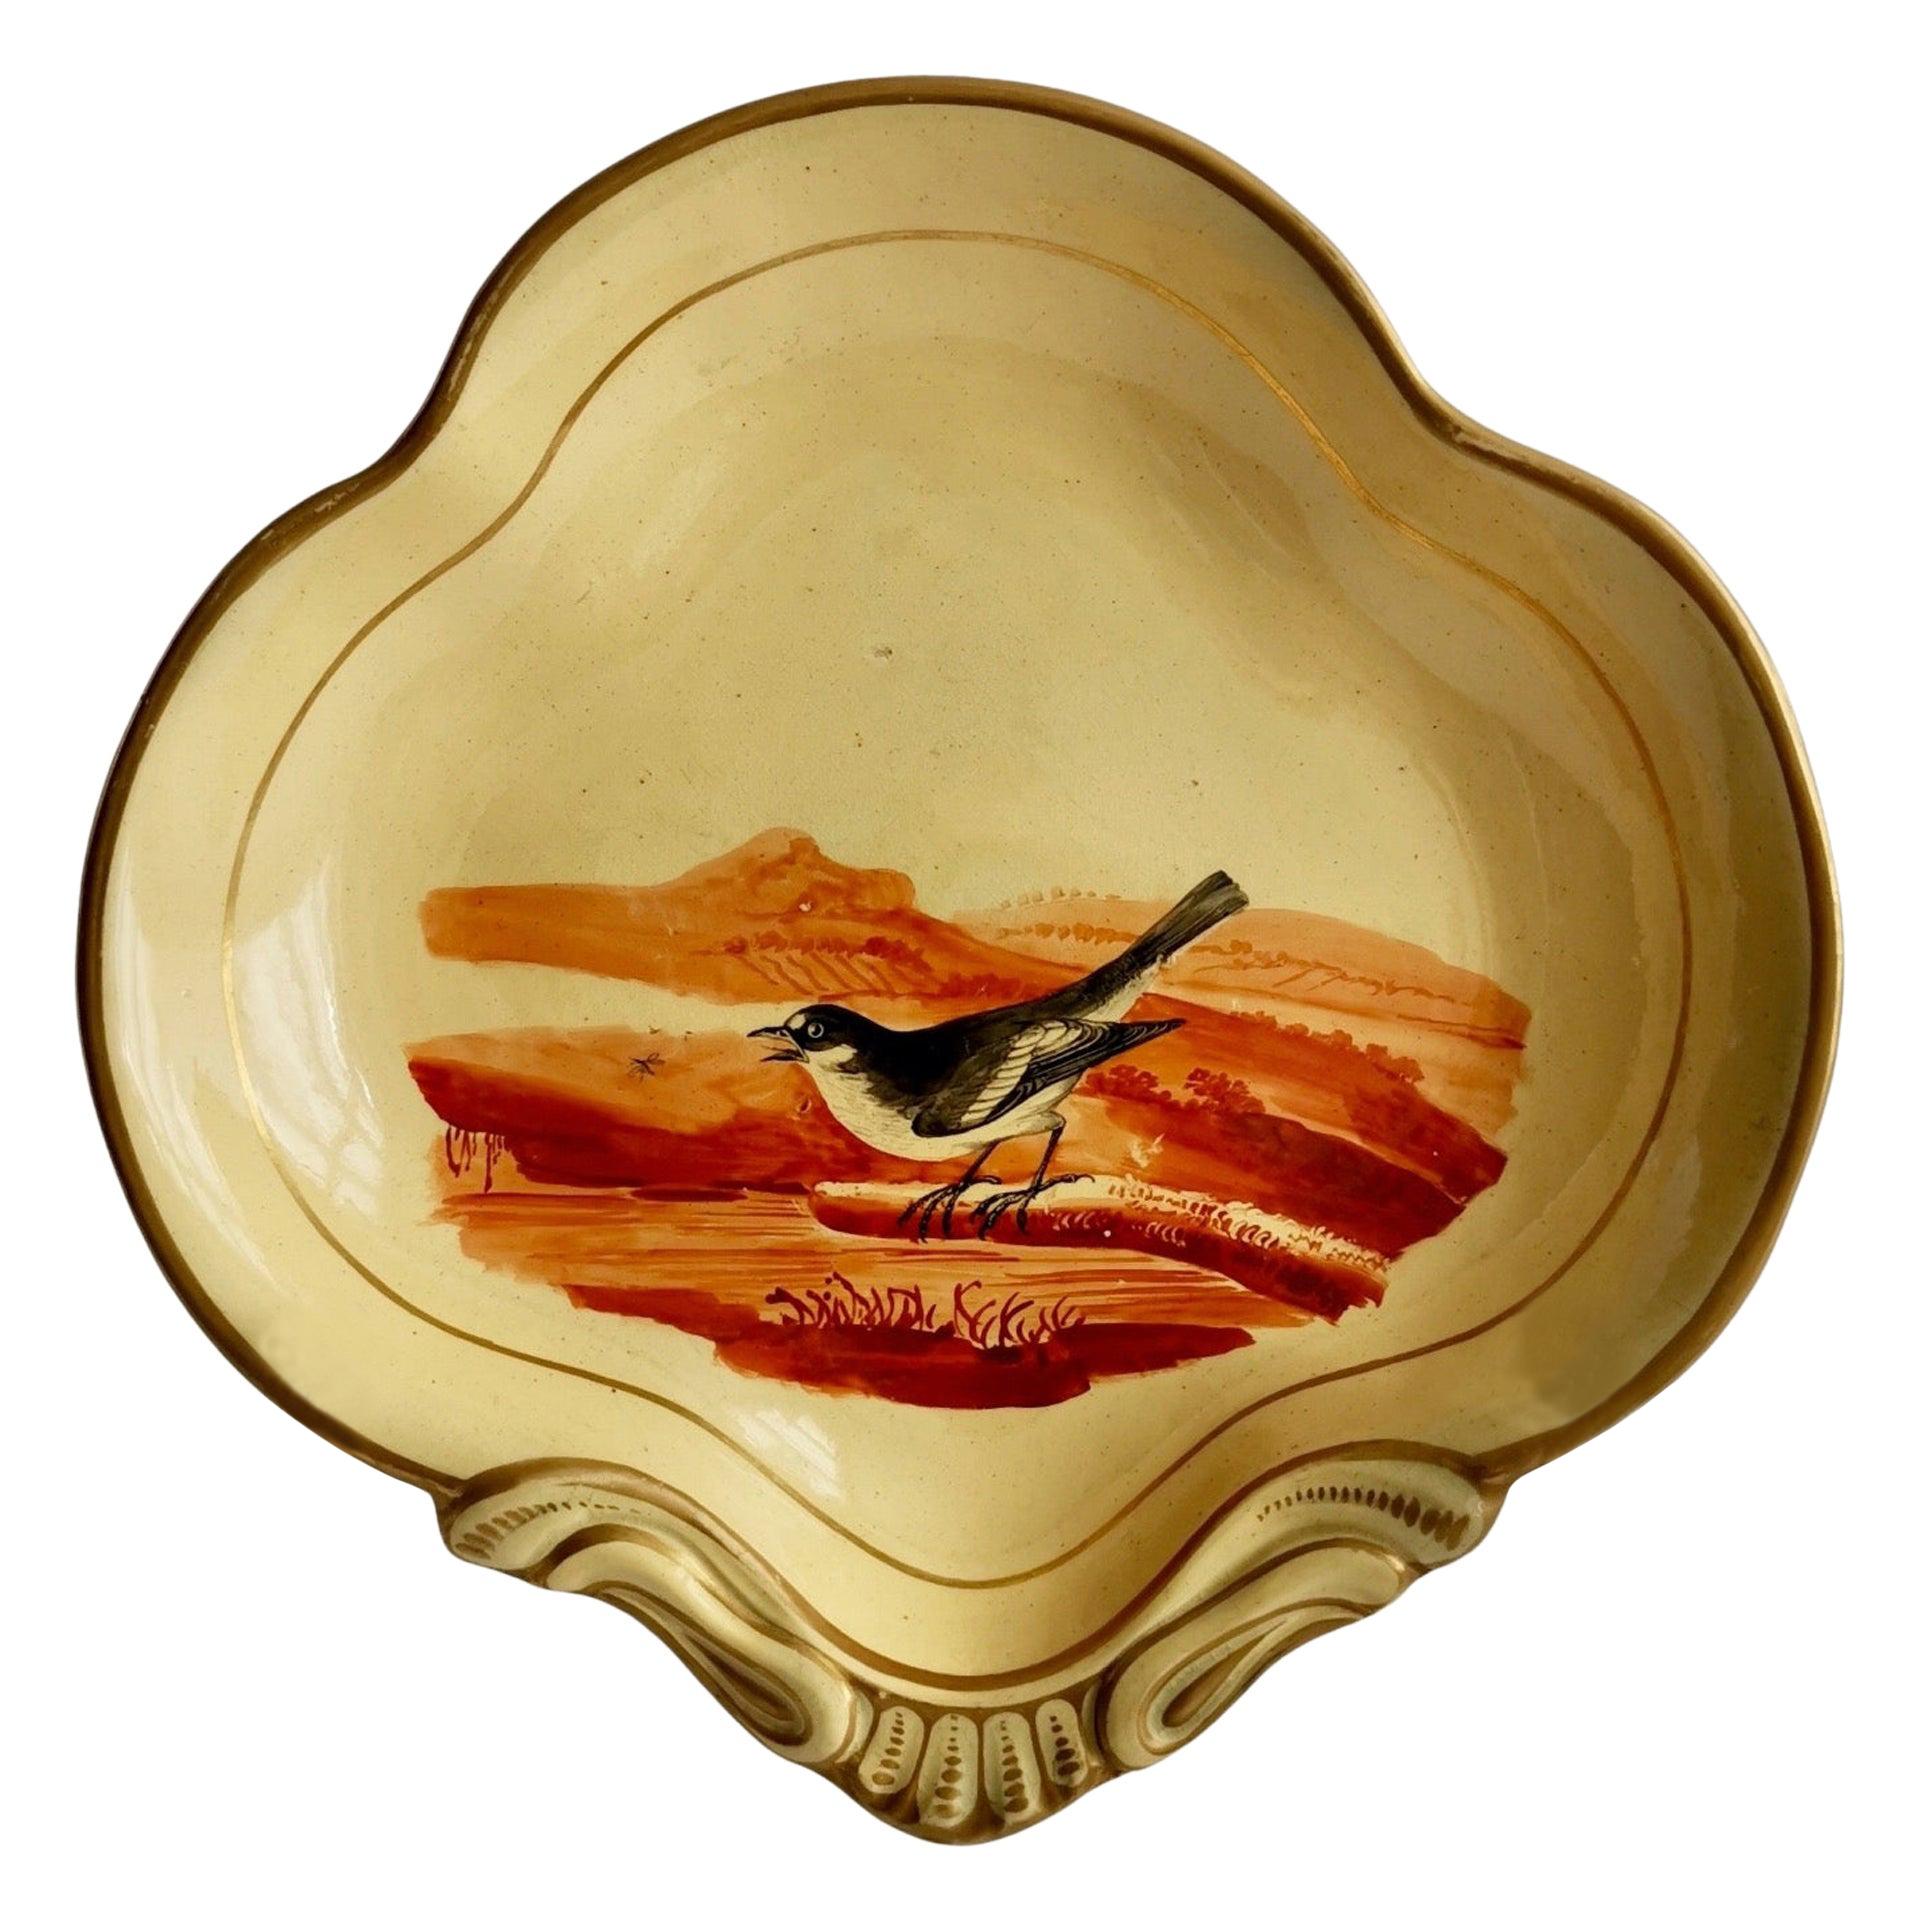 Pearlware Beige Shell Dish with Bird Attributed to Wedgwood, Regency, circa 1820